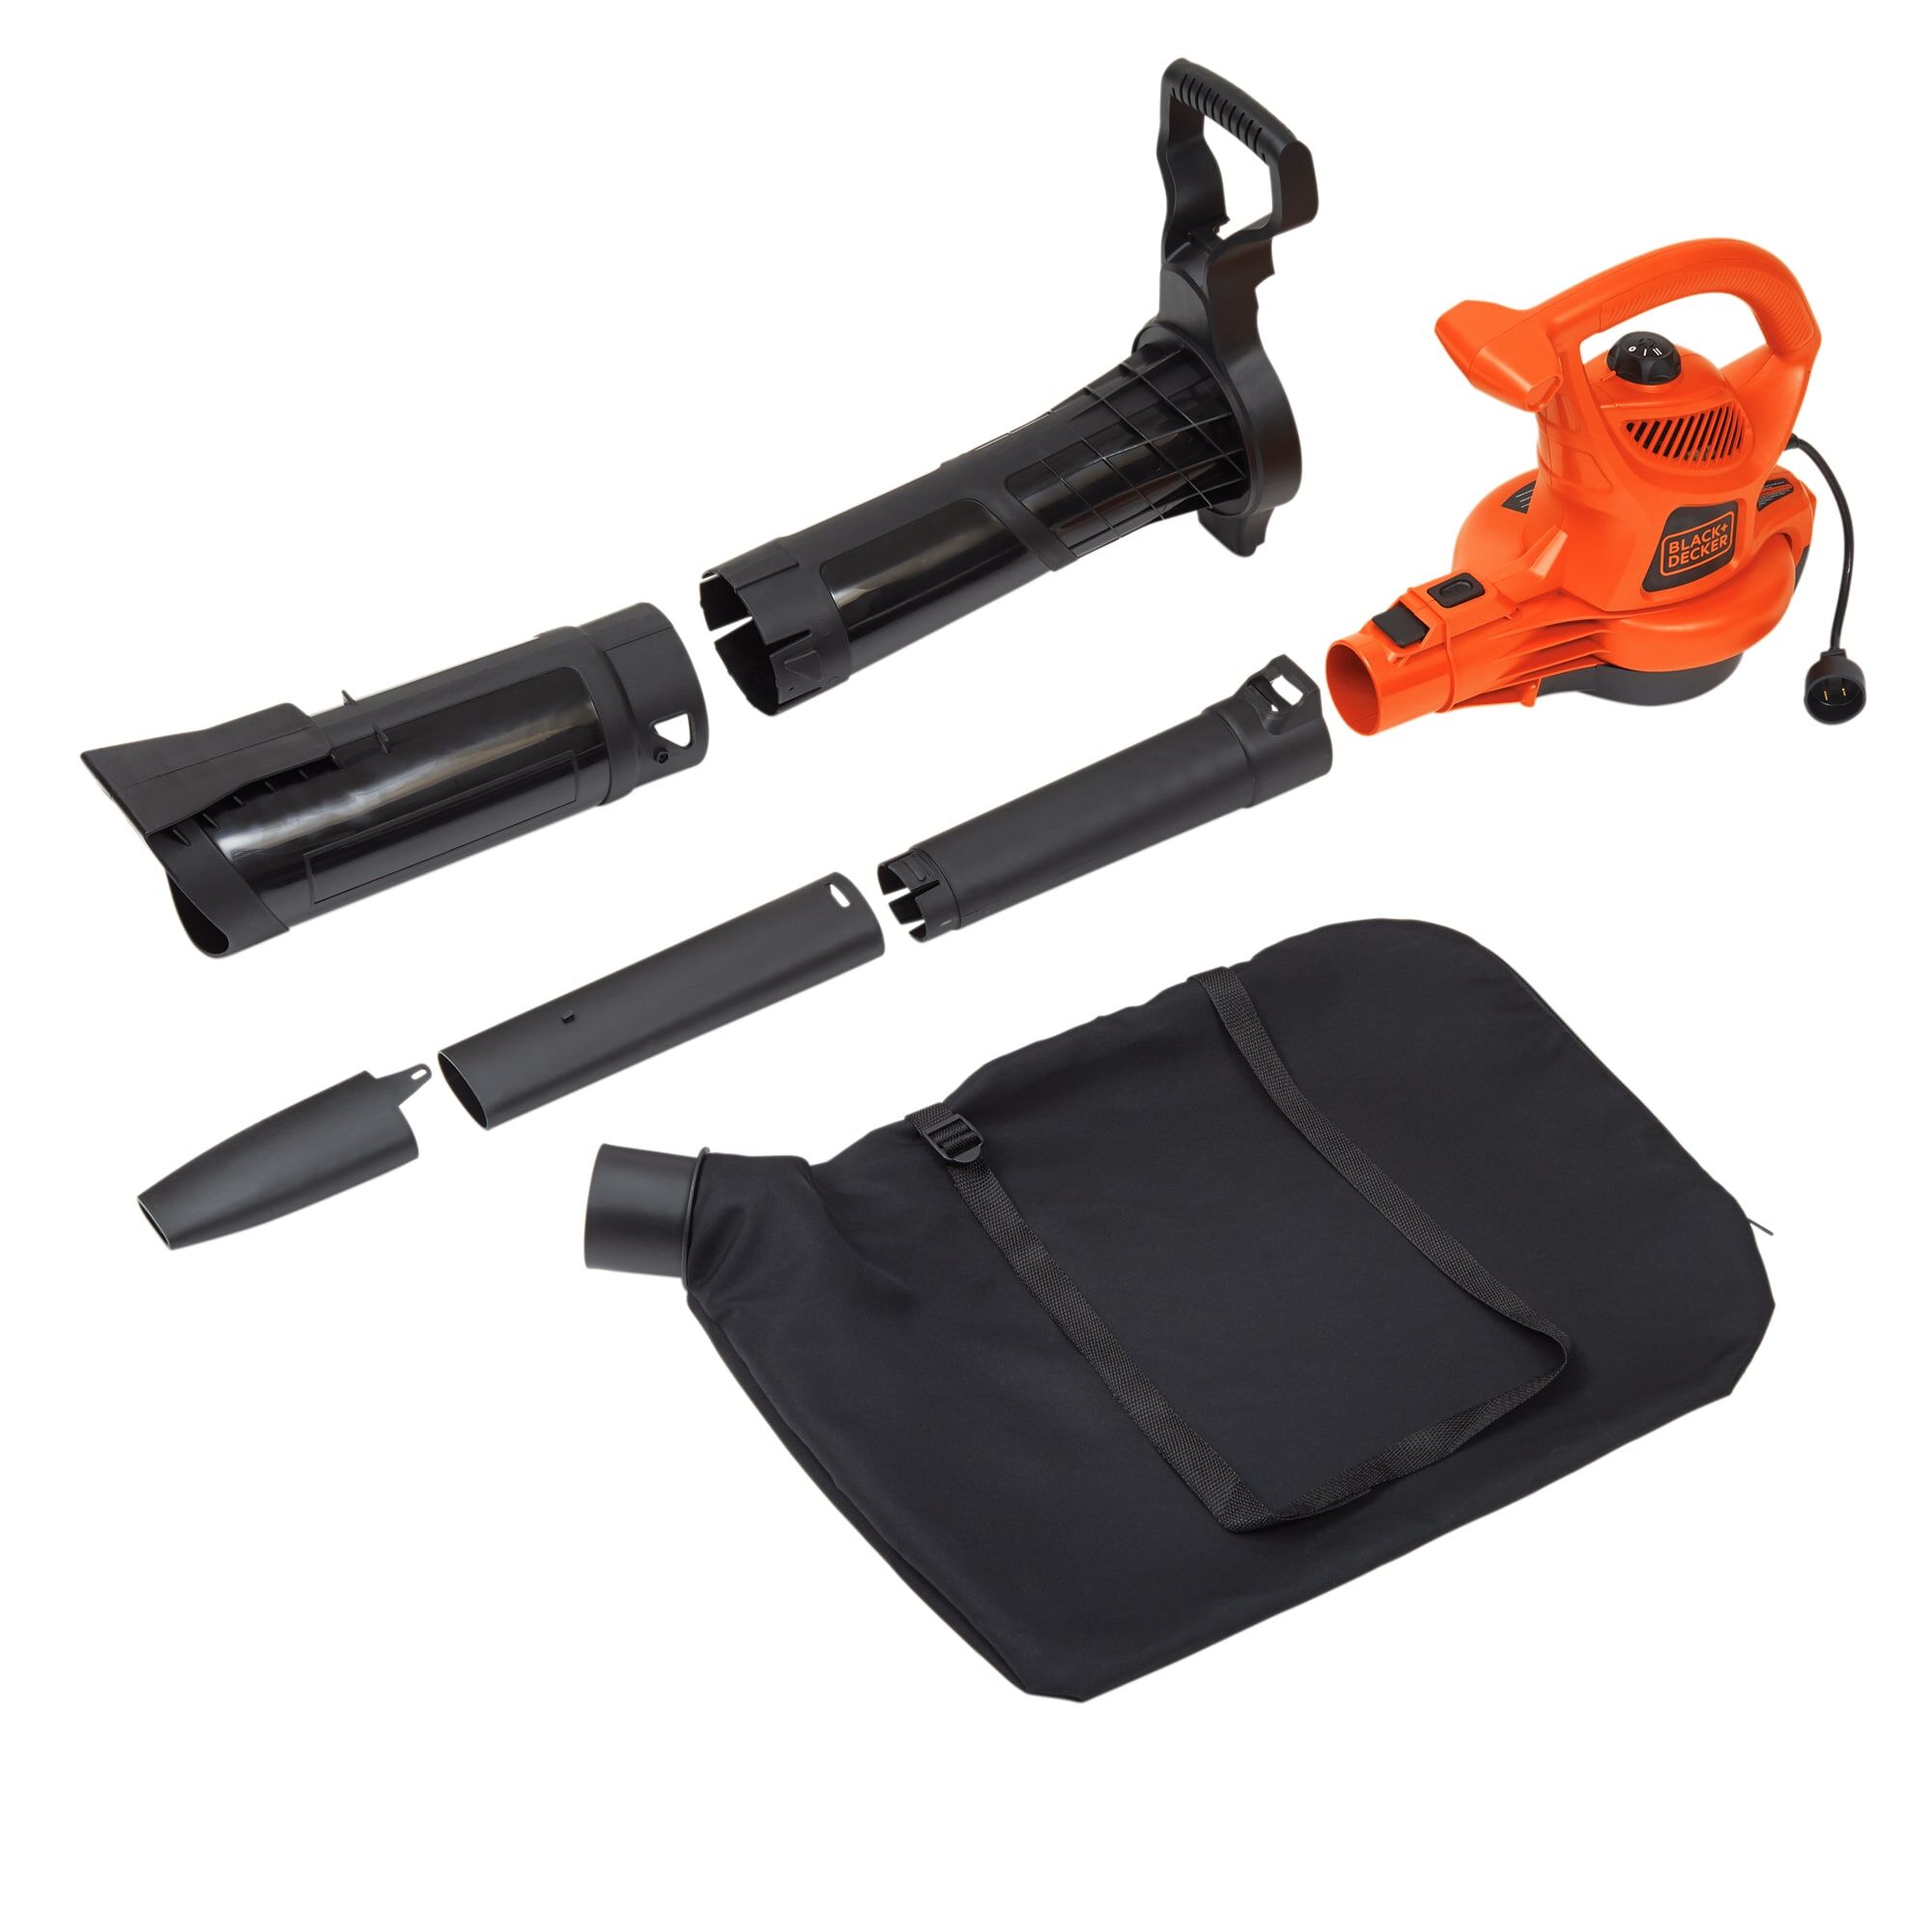 Kit components of the BLACK+DECKER 12 amp blower or vacuum